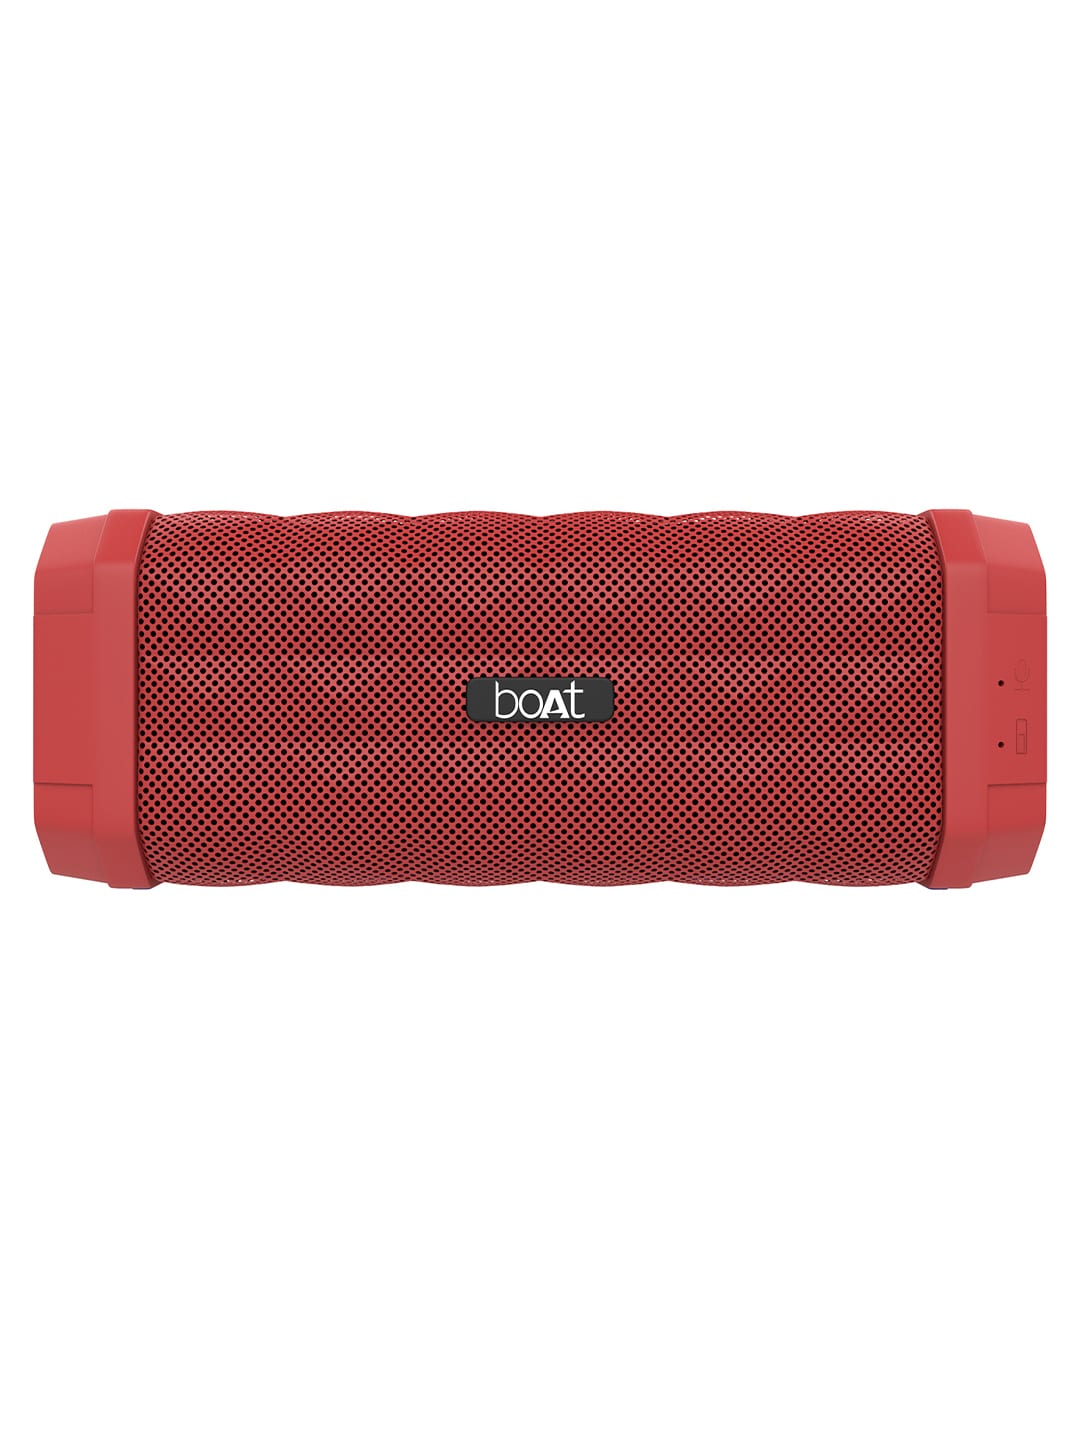 boAt Stone 650 10W Raging Red Stereo Wireless Speaker with IPX5 & Up to 7H Playtime Price in India